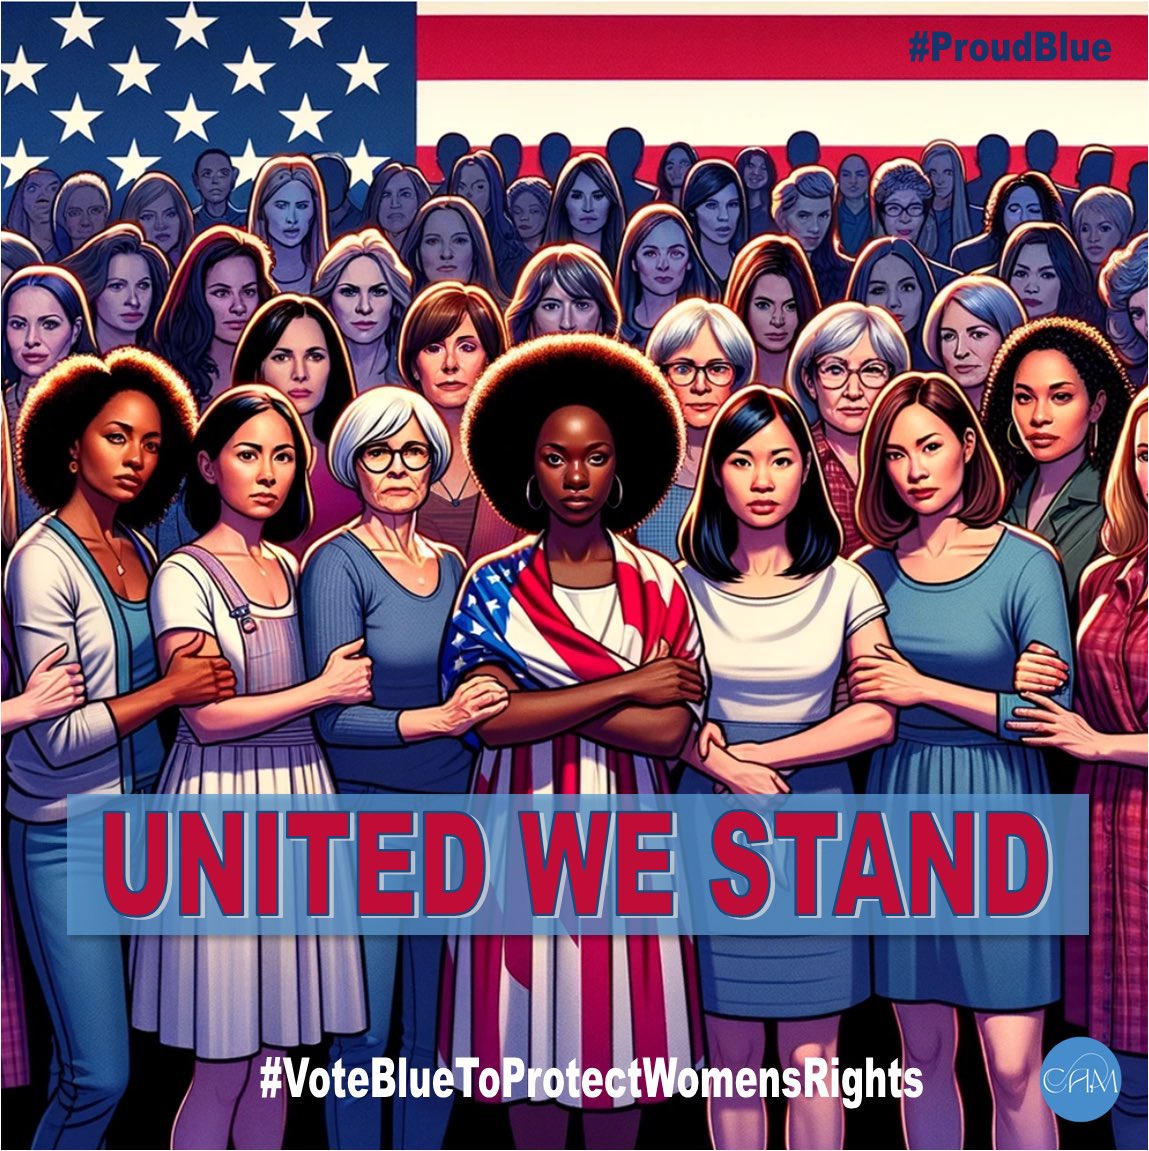 #ProudBlueWomen
When women unite, we win. Stand united for women’s rights
#RoevemberIsComing2024 
#VoteBlueToProtectWomensRights